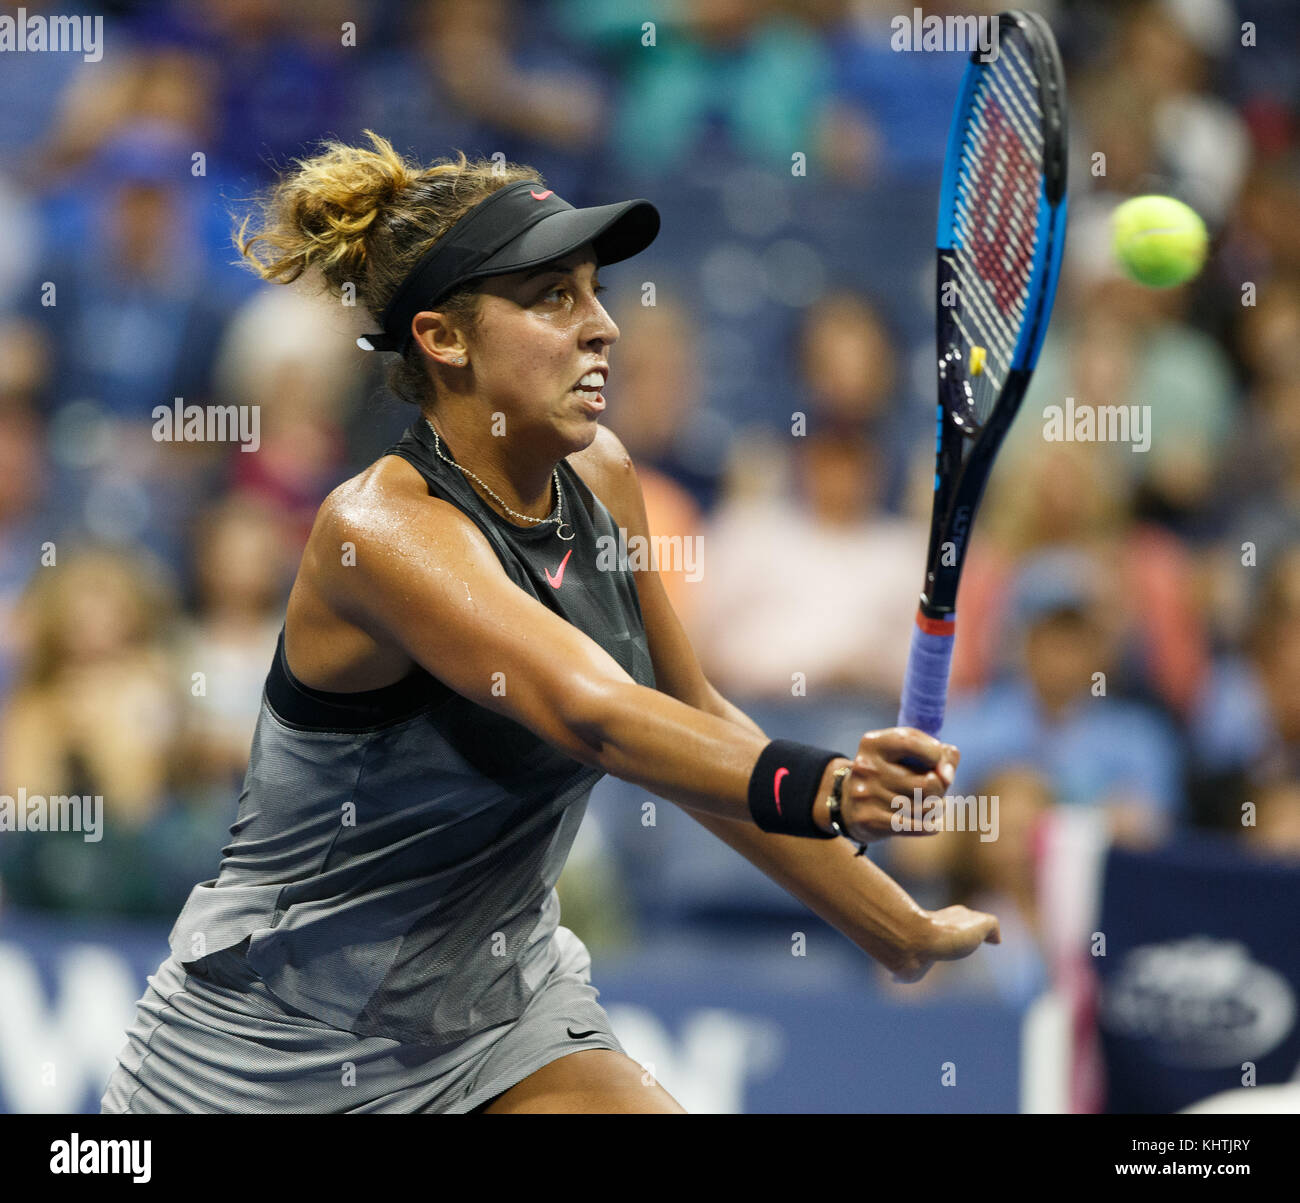 American tennis player MADISON KEYS (USA) playing forehand shot in US Open 2017 Tennis Championship, New York City, New York State, United States. Stock Photo